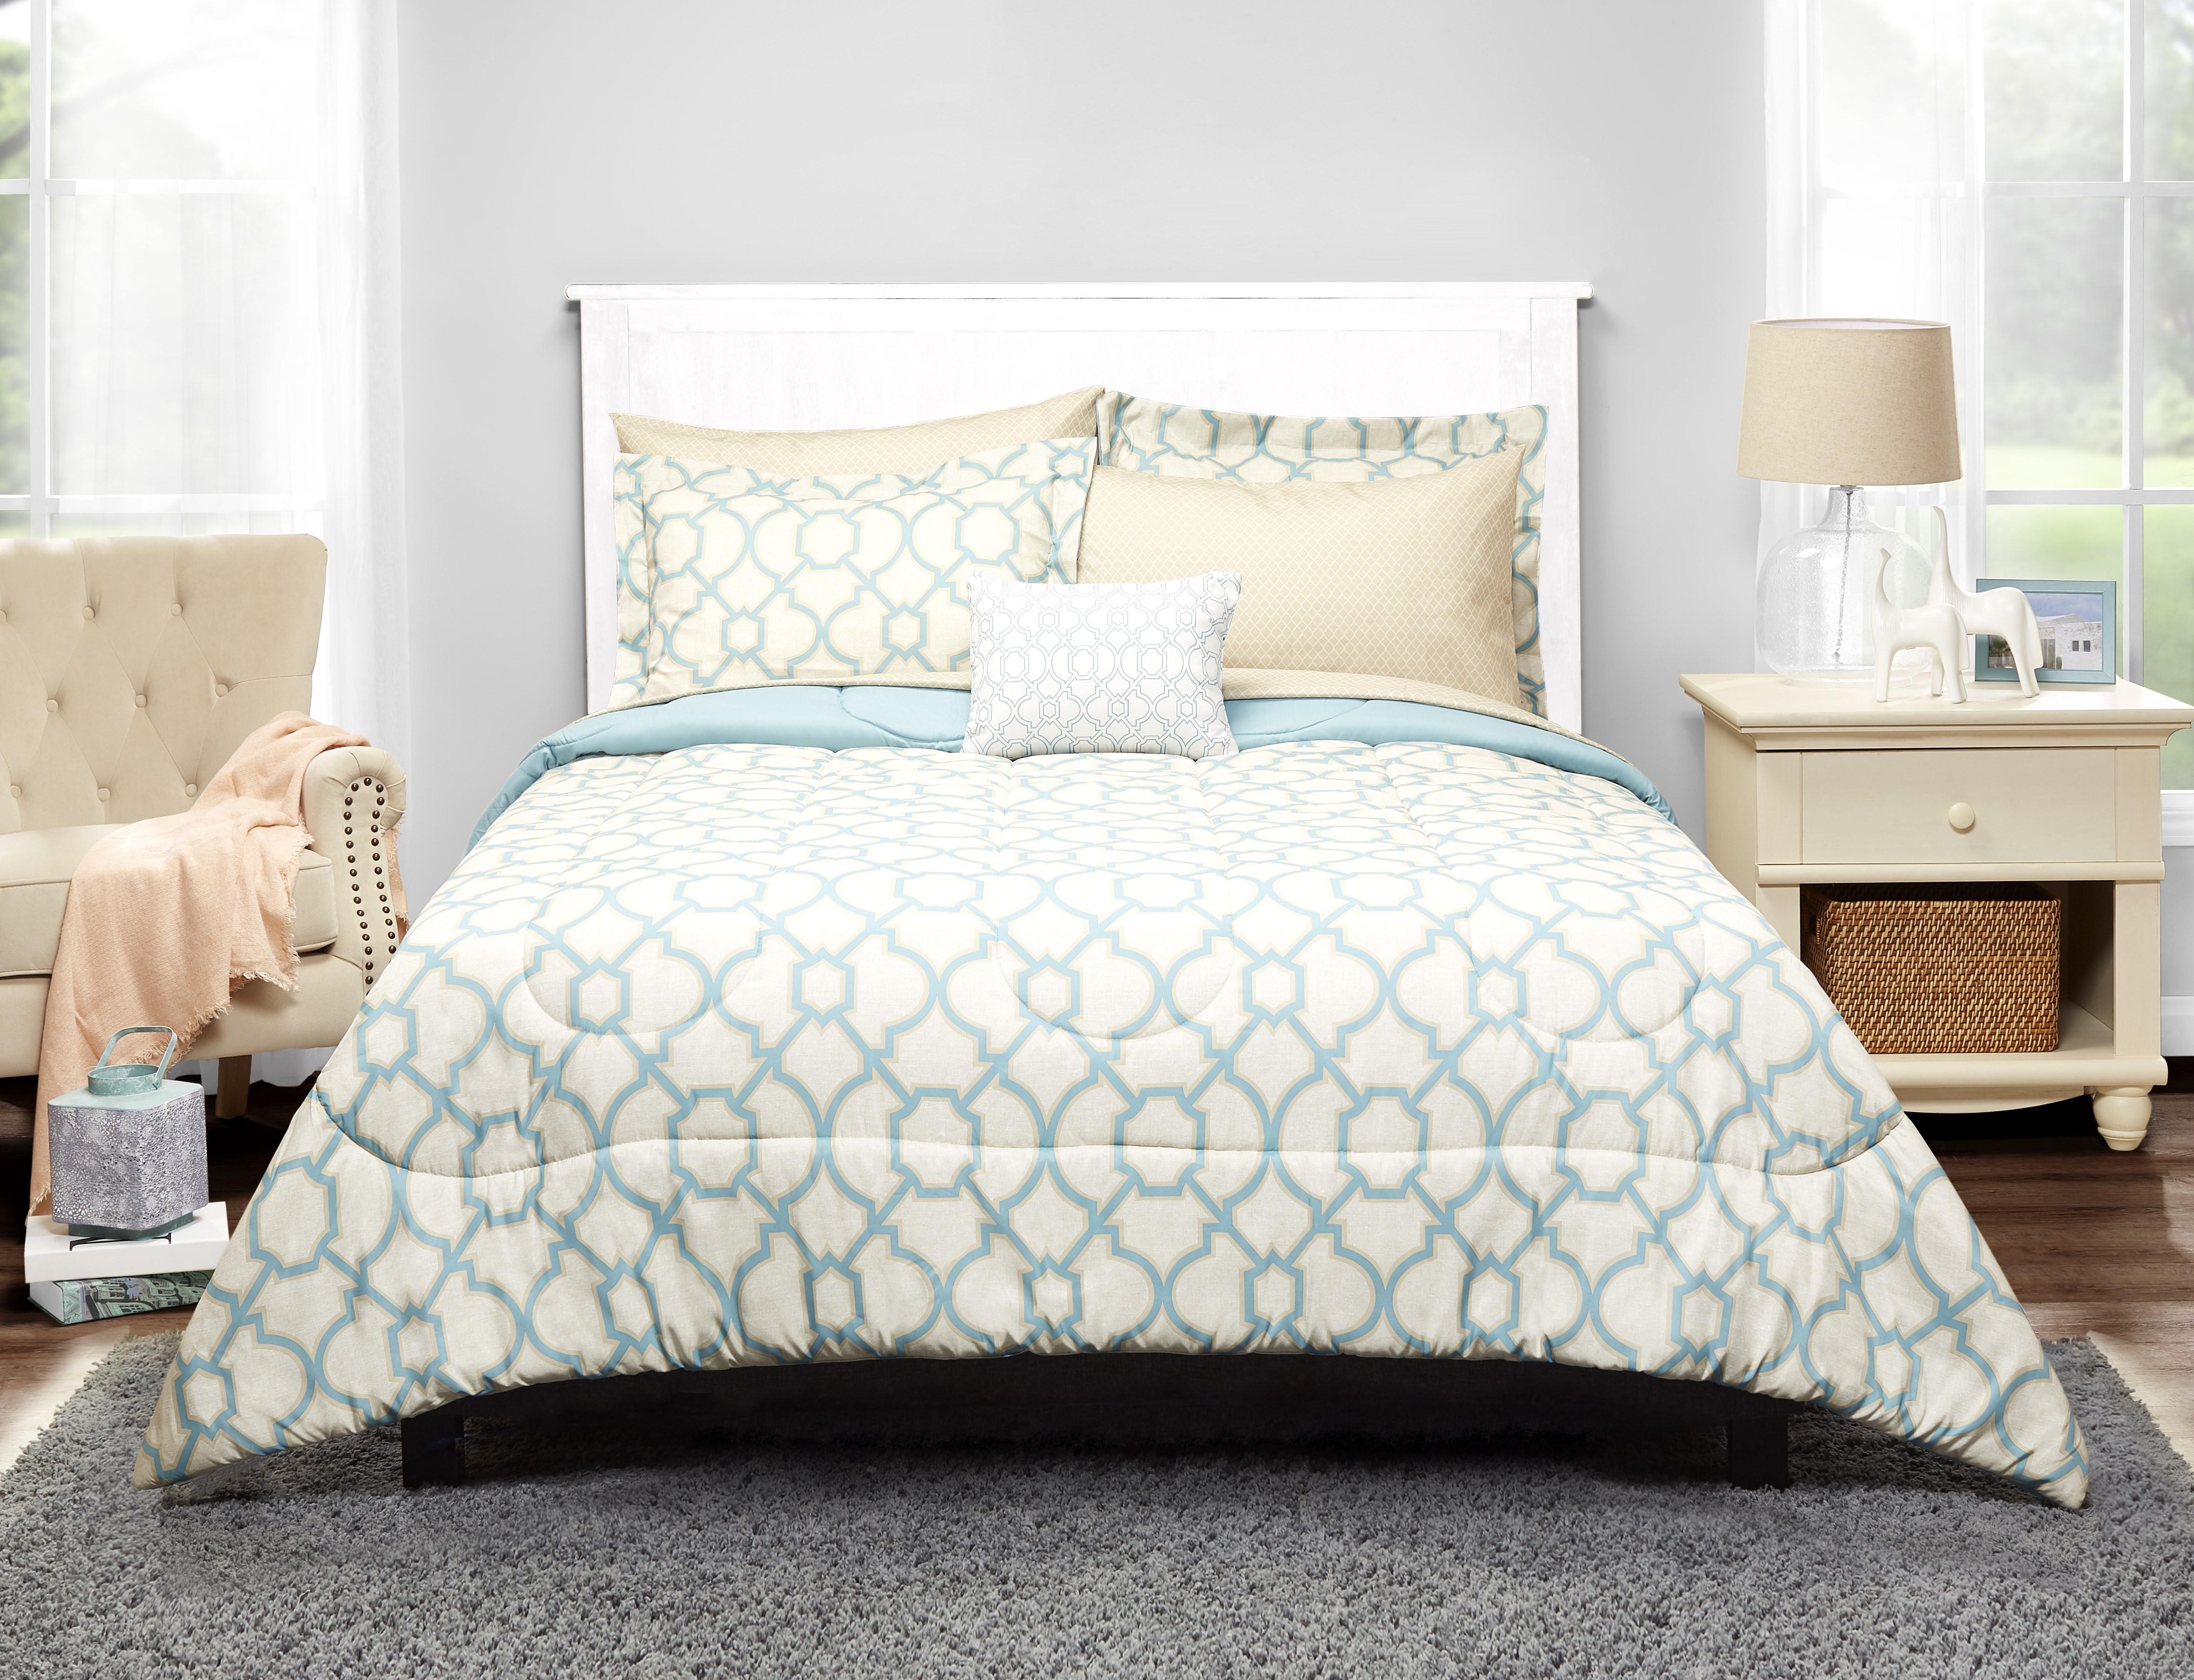 Mainstays Fretwork Bed in a Bag Bedding, Twin/Twin XL - image 1 of 2